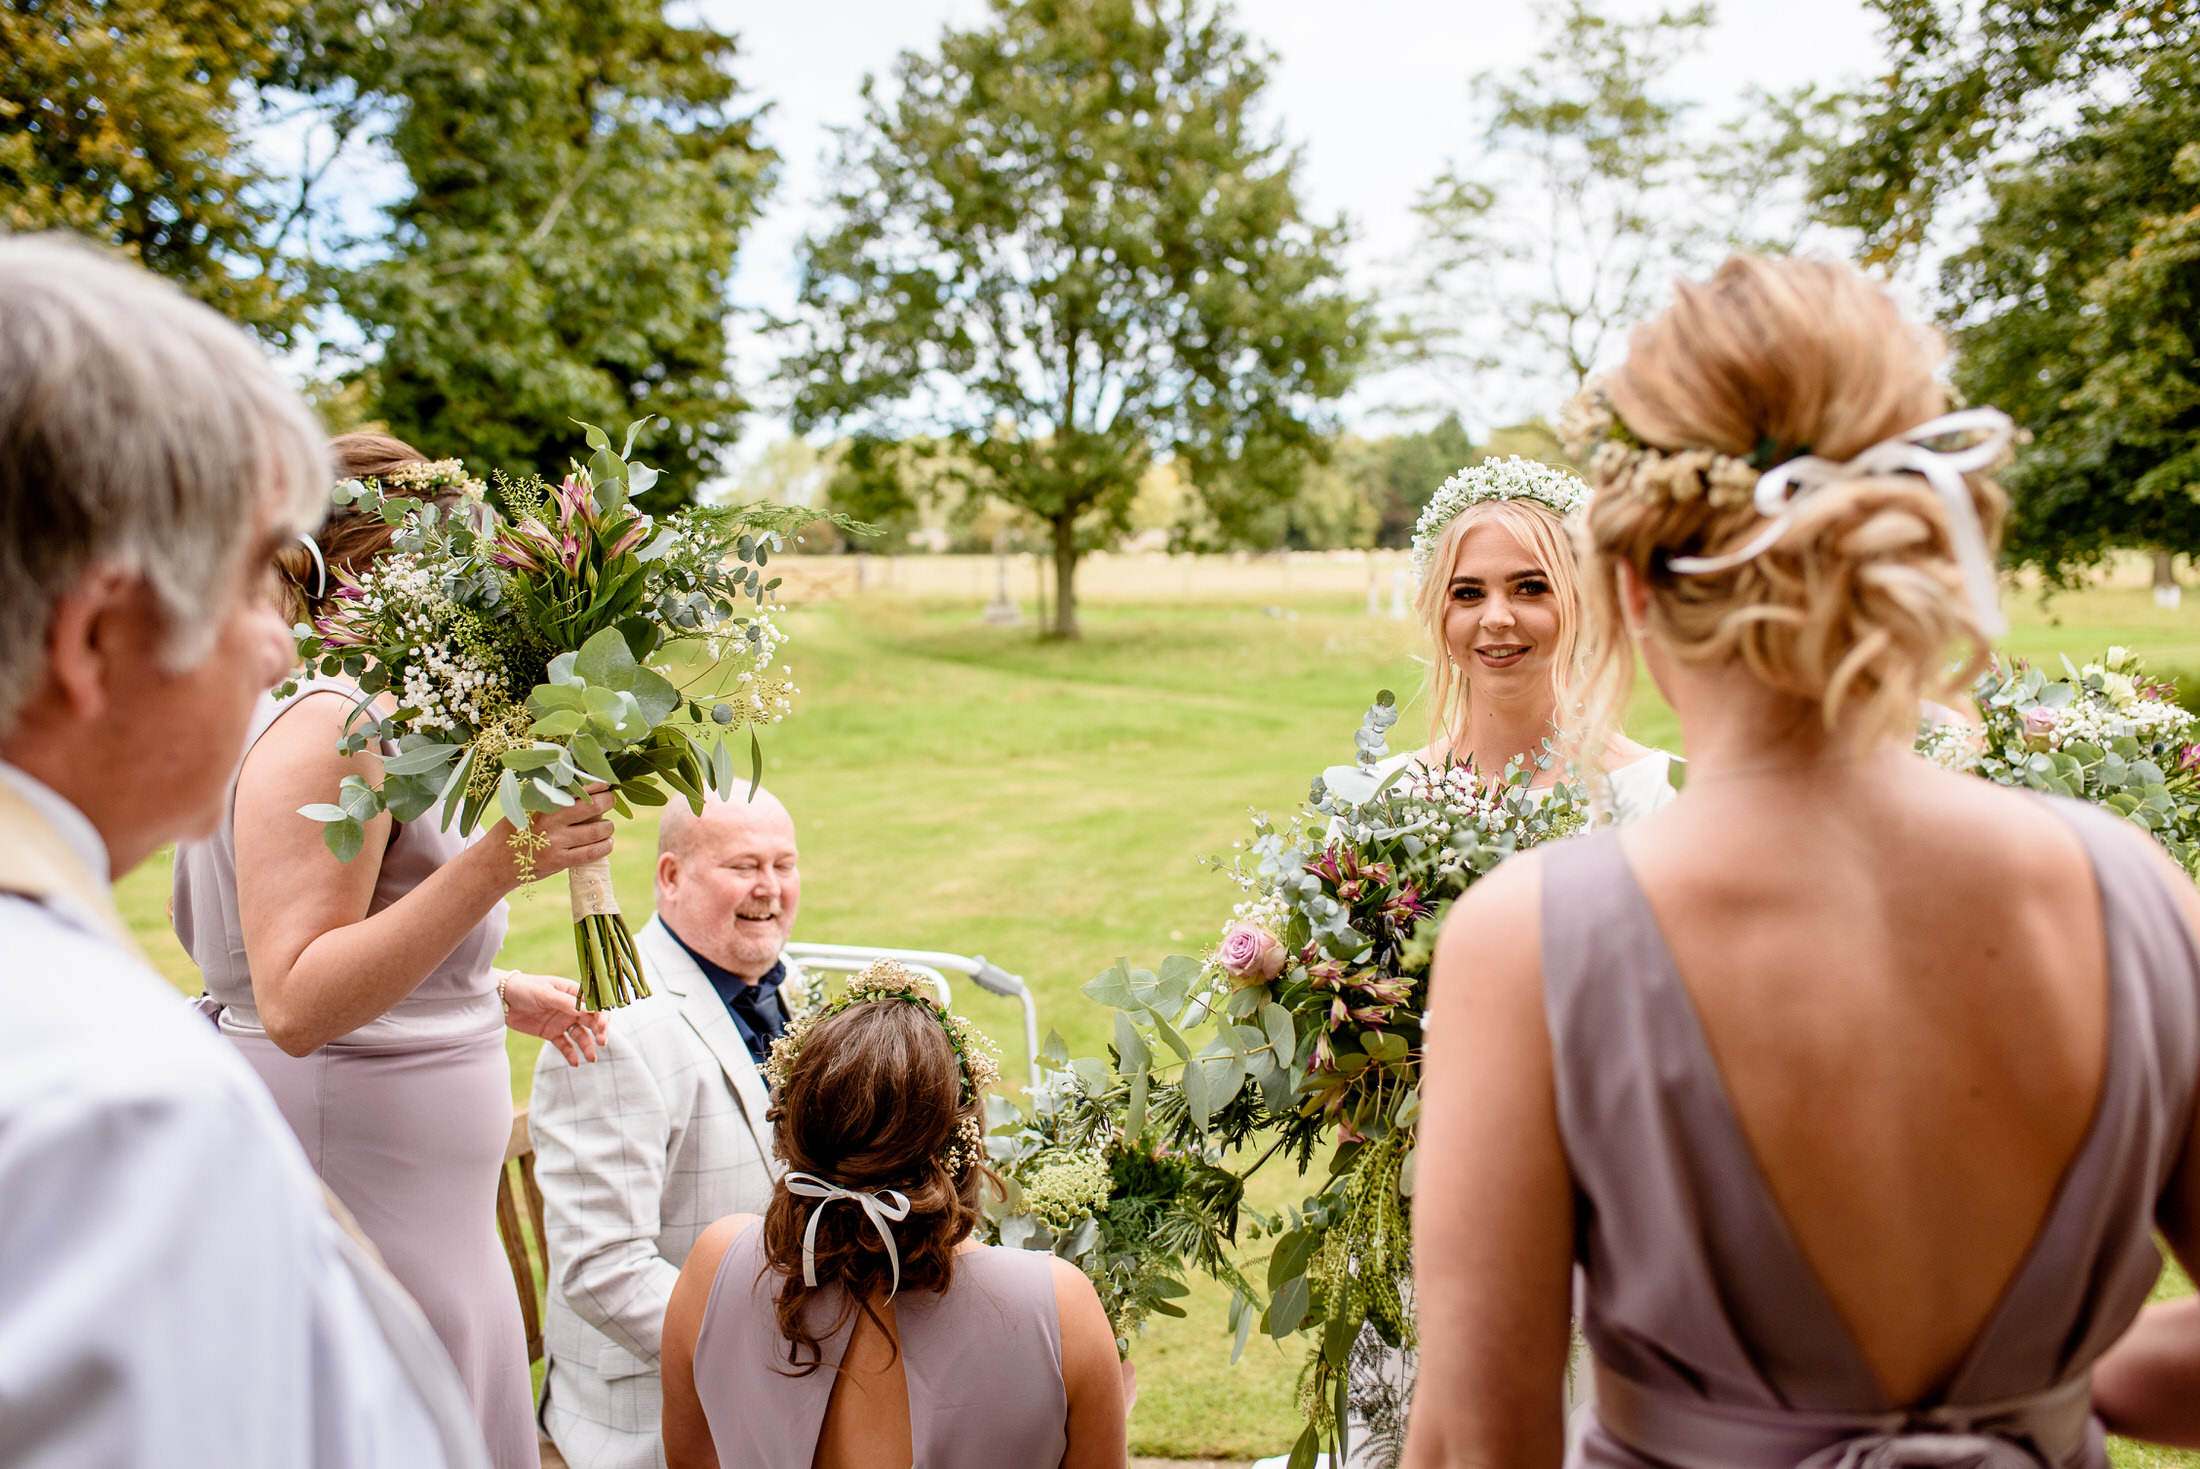 A bride and her bridesmaids look at each other during a wedding ceremony at Scrivelsby Walled Garden.